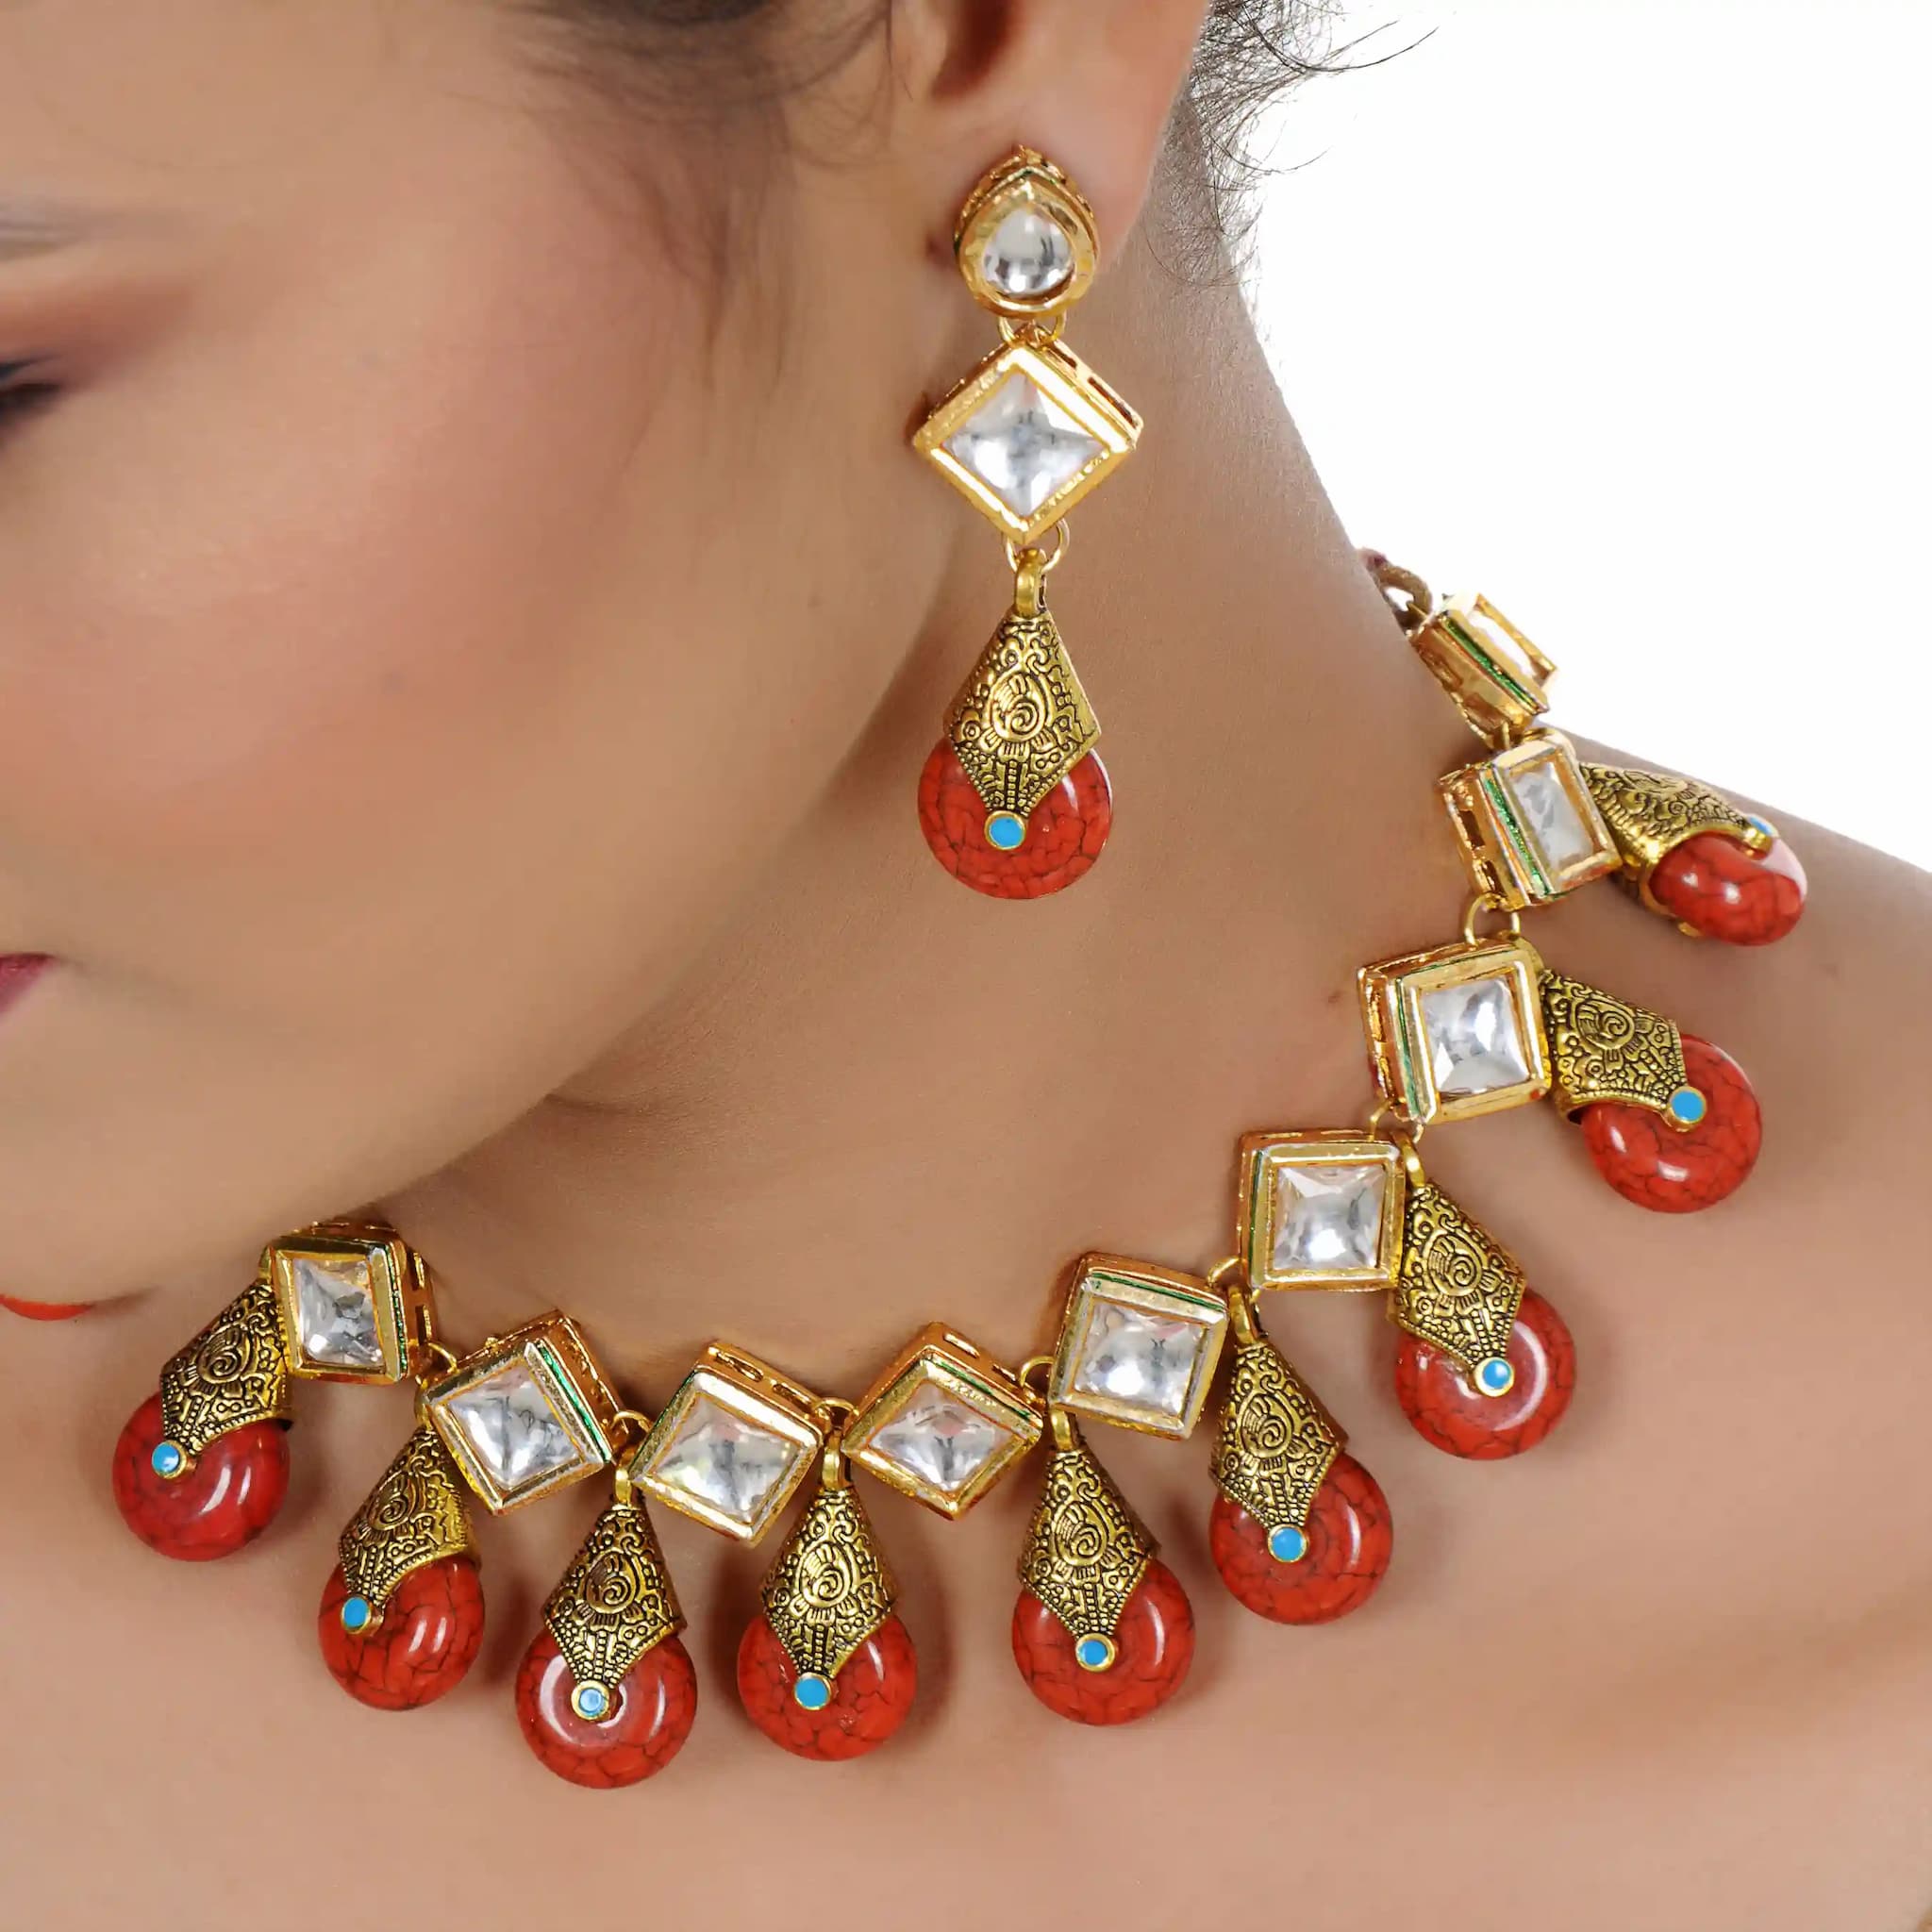 Gold Plated(18k) Big Square Stone Necklace With Earrings - Red